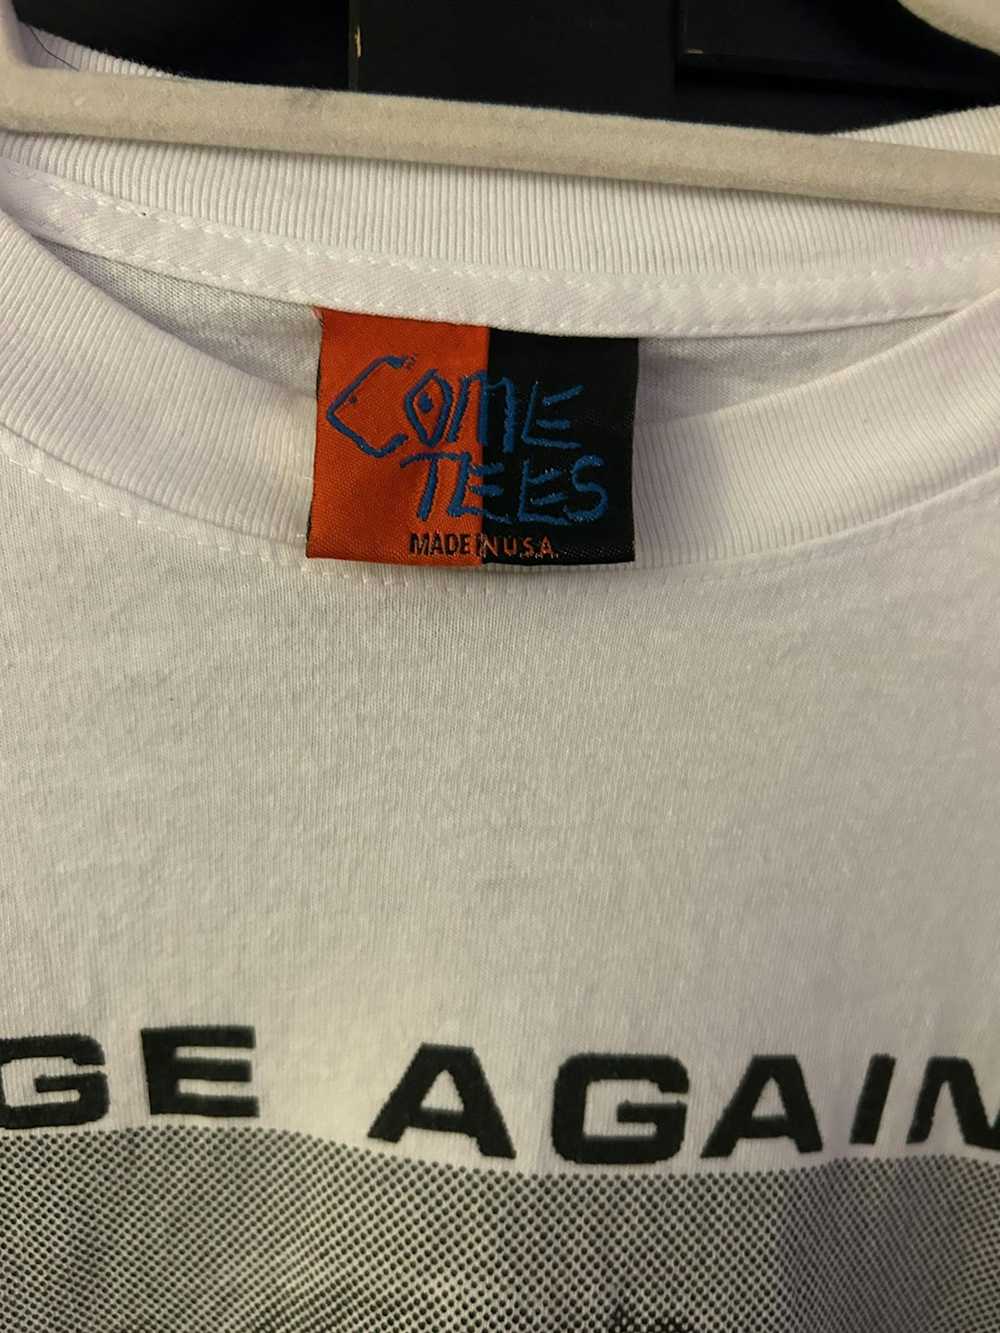 Come Tees × Made In Usa × Rage Against The Machin… - image 3